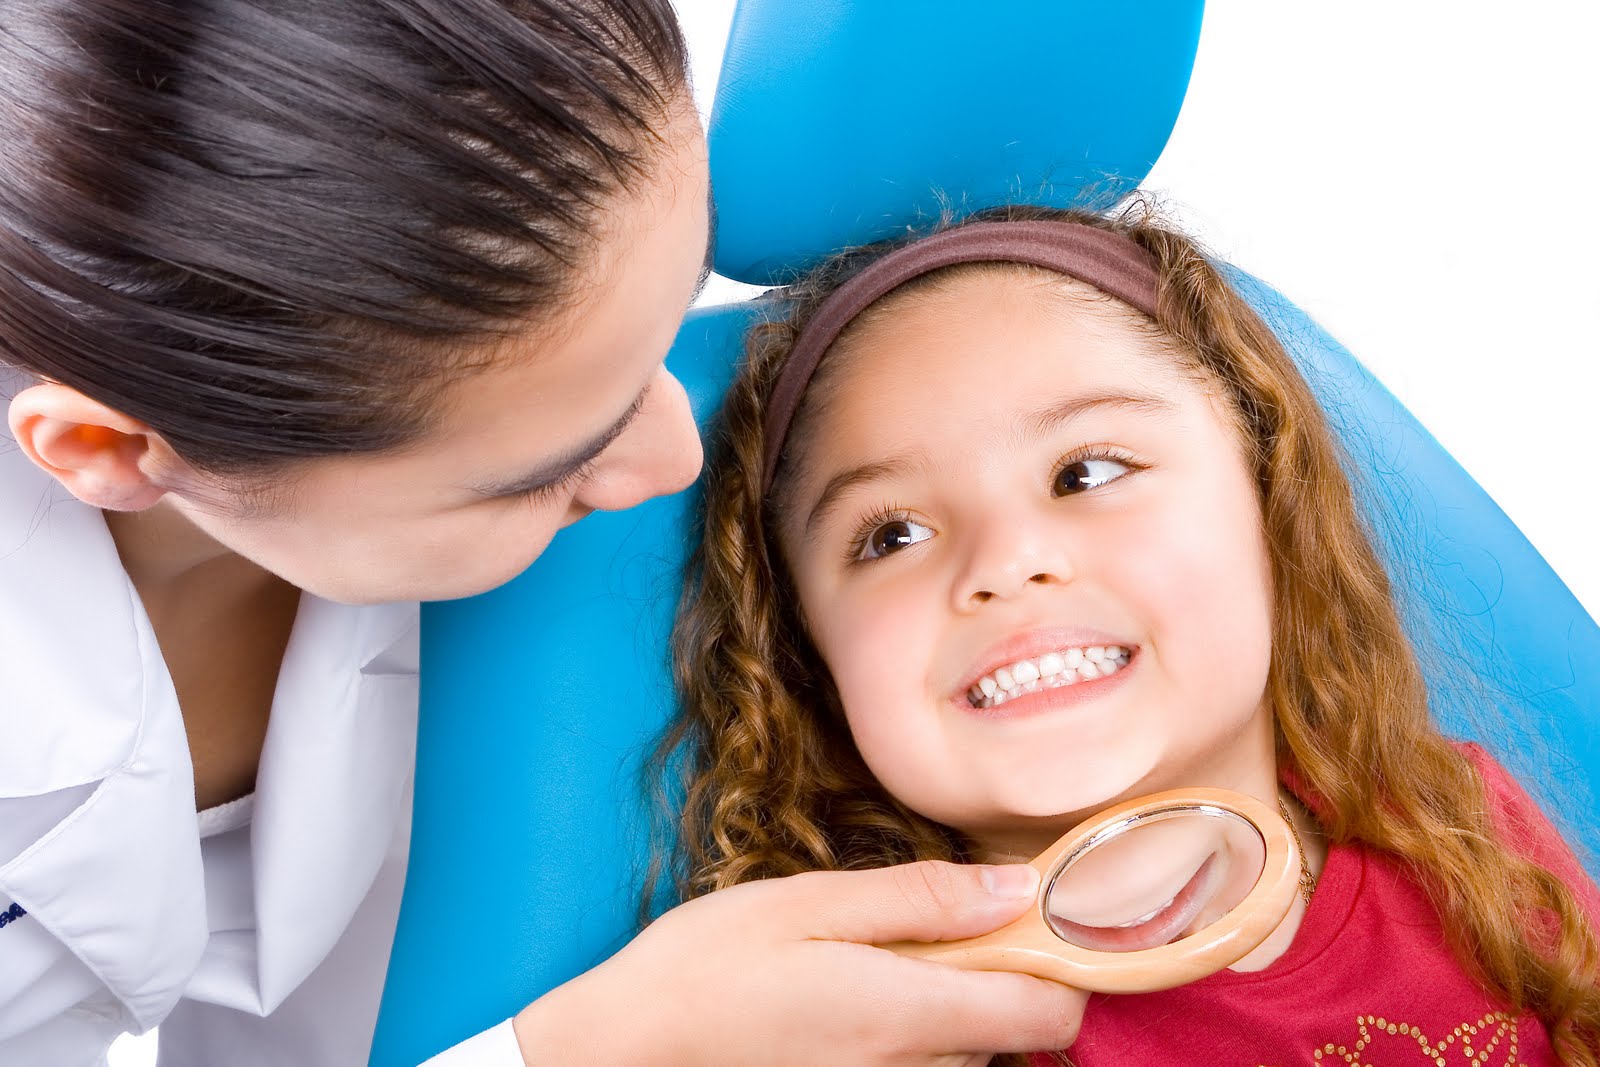 How to prepare for a kids’ dental appointment